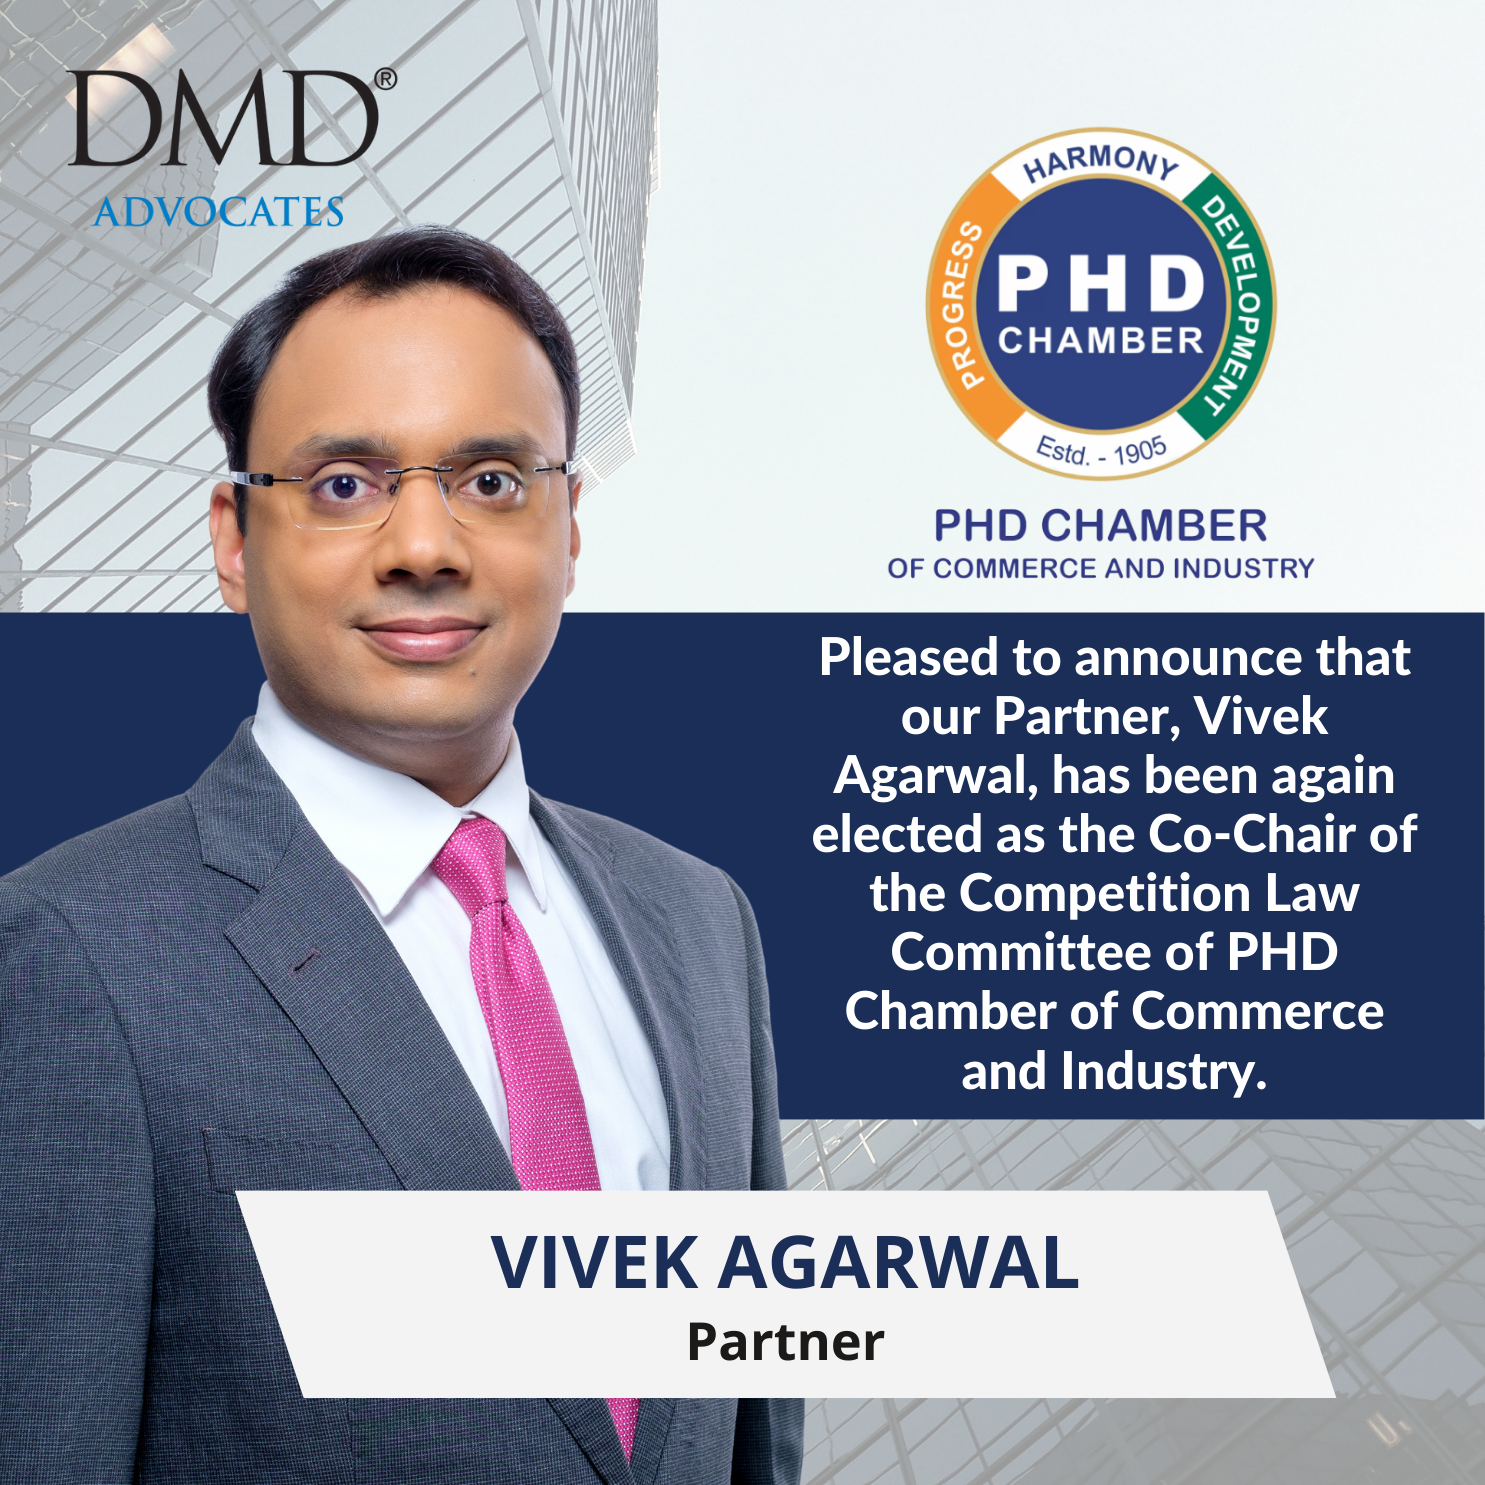 Vivek Agarwal, has been elected as the Co-Chair of the Competition Law Committee of PHD Chamber of Commerce and industry